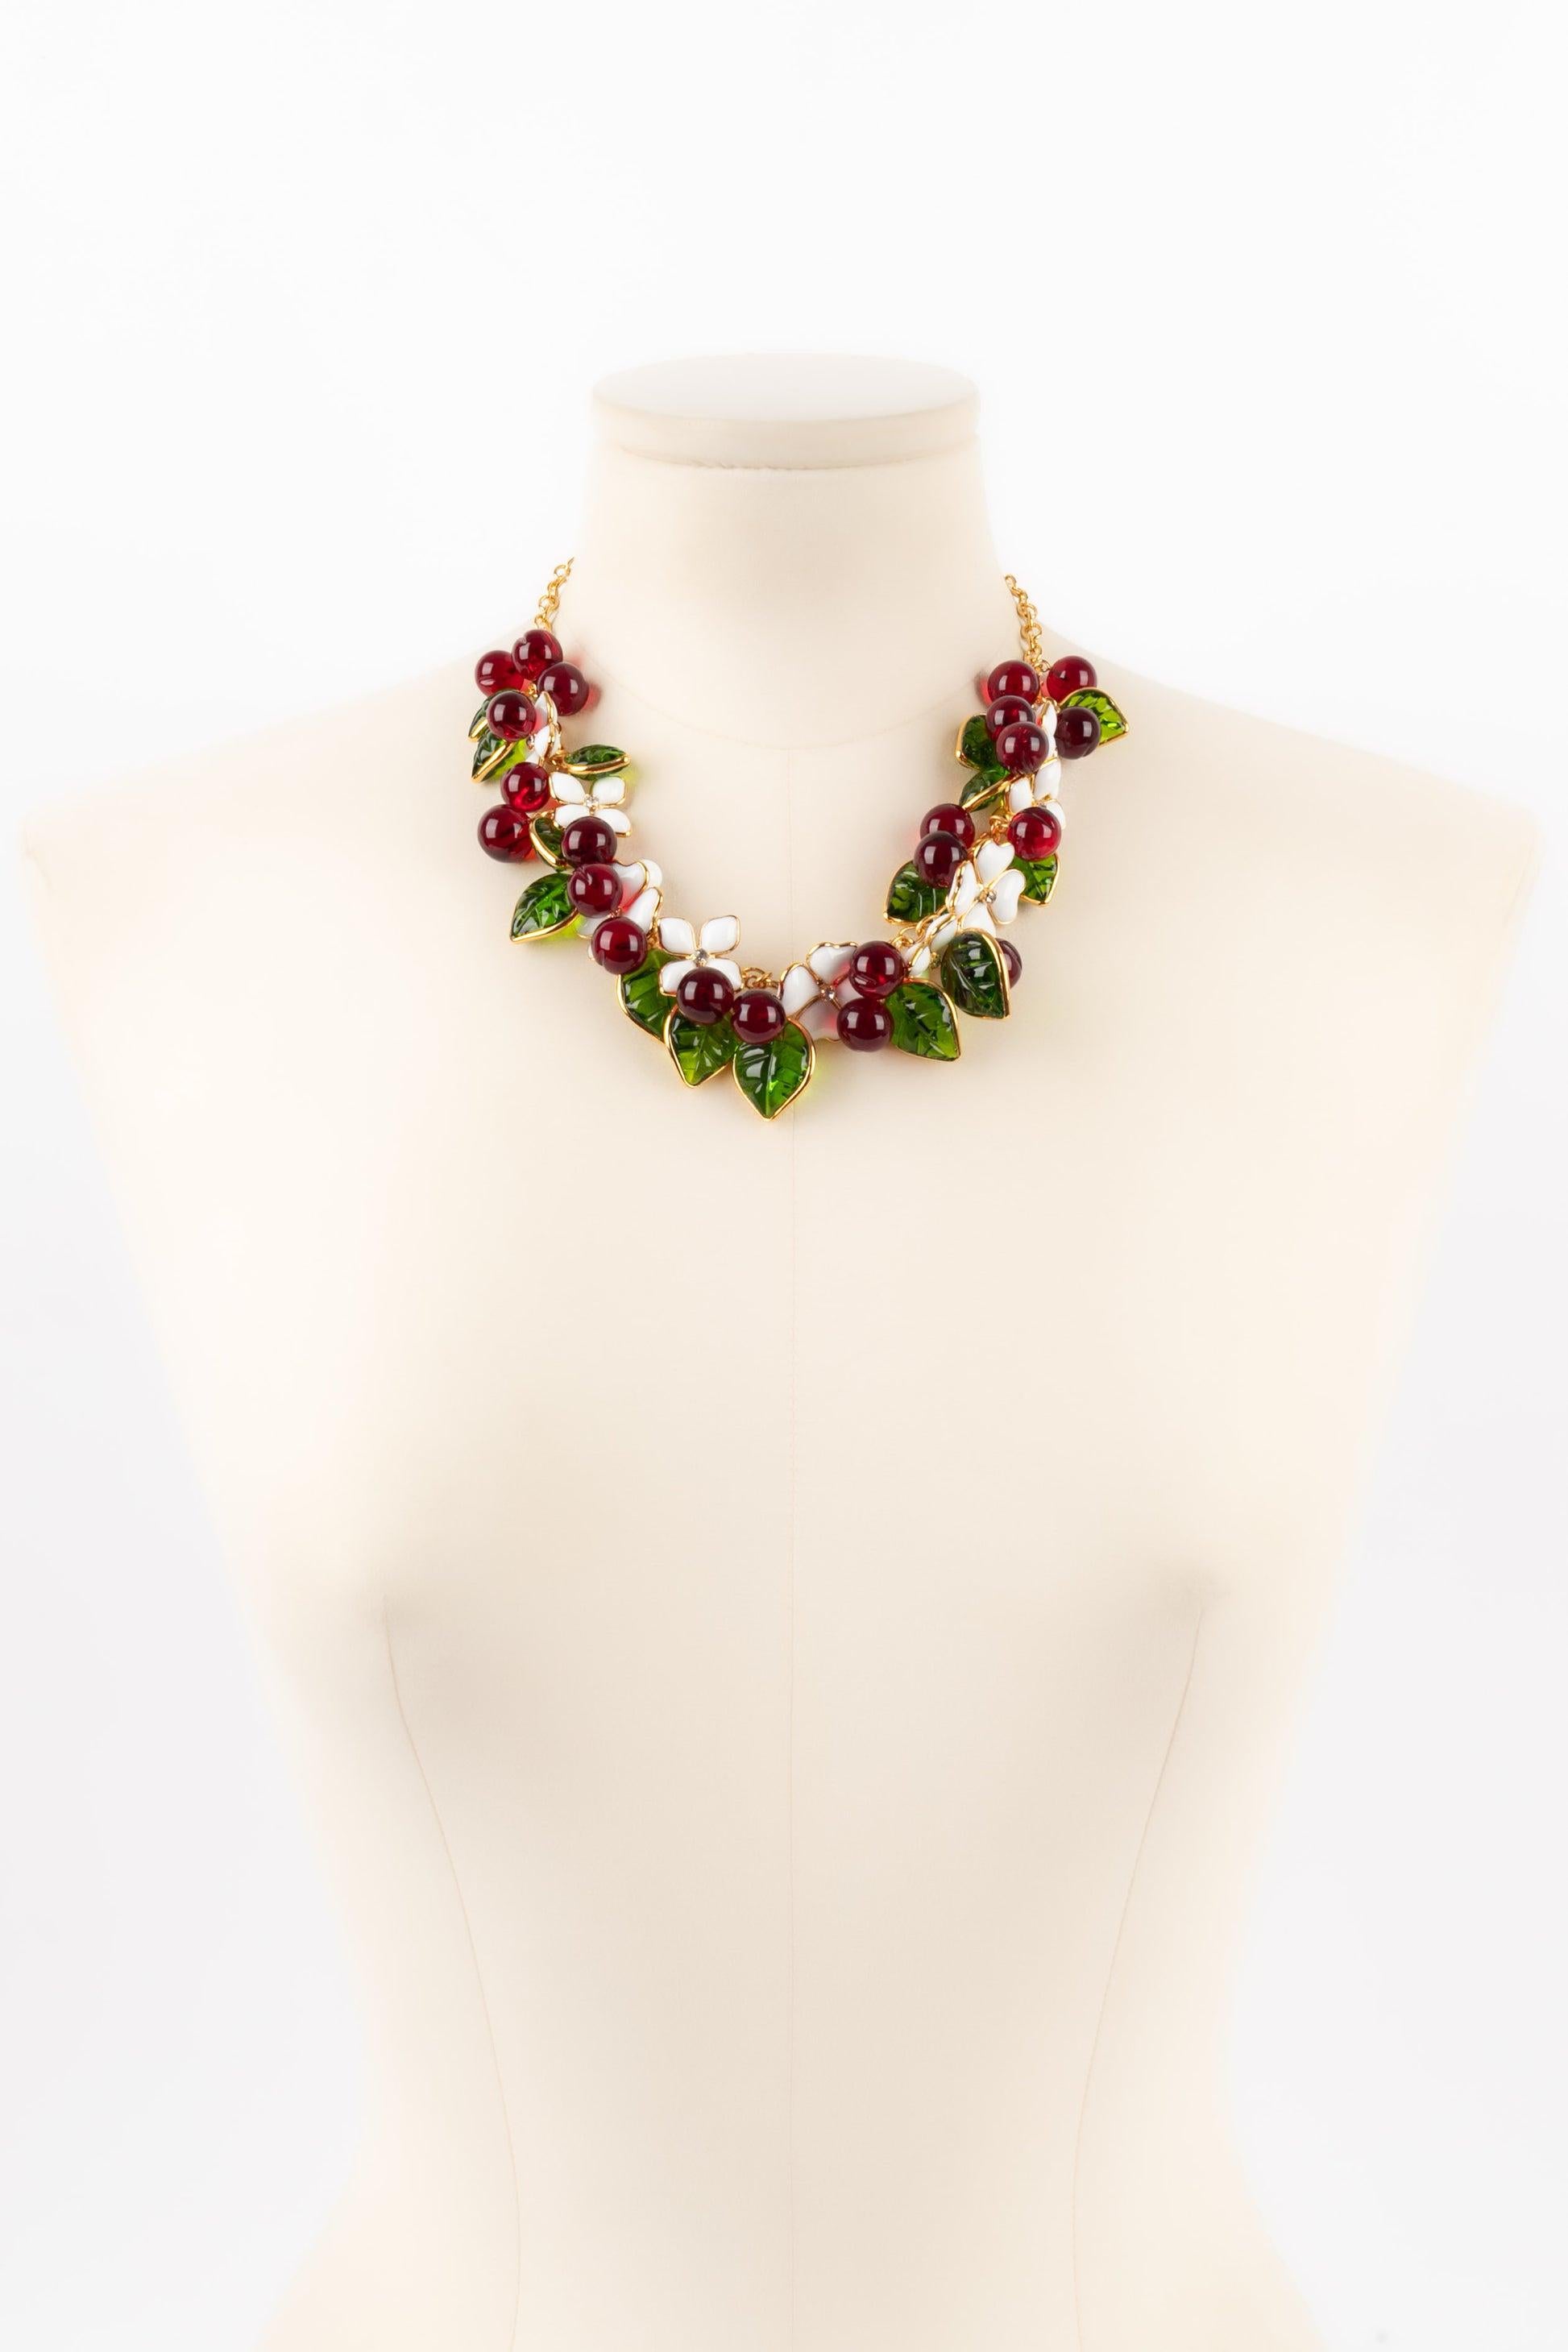 Augustine - (Made in France) Golden metal necklace with glass paste flowers.

Additional information:
Condition: Very good condition
Dimensions: Length: 50 cm

Seller Reference: BC204